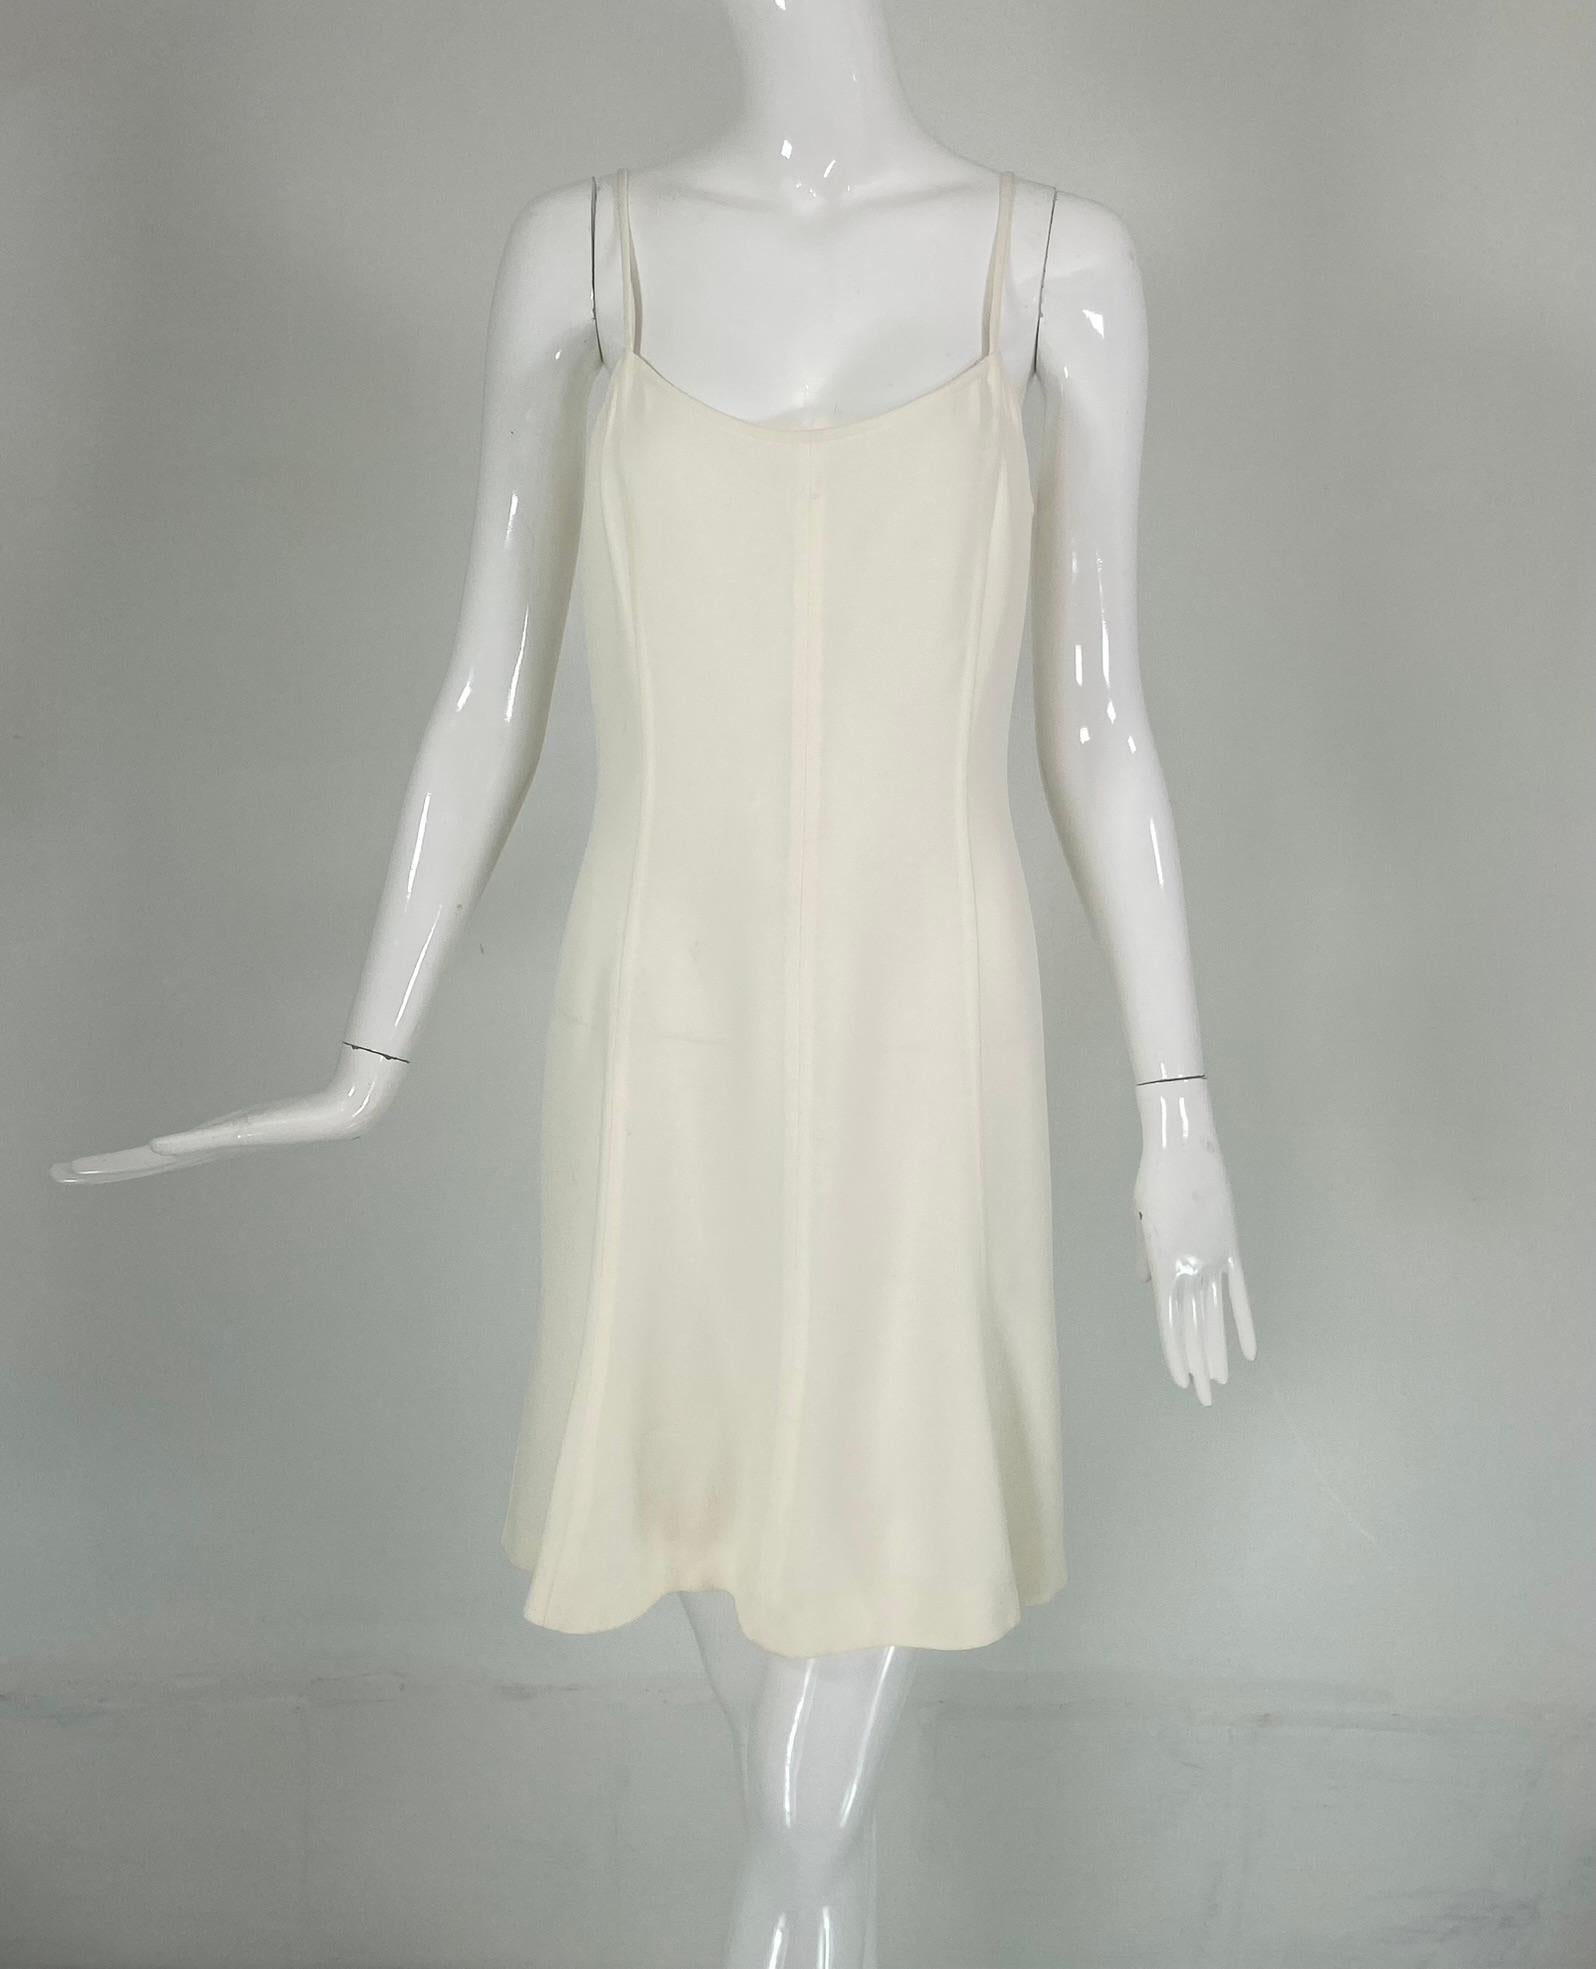 Chanel off white two piece spaghetti strap sun dress & tweed jacket 1994E. Princess seam spaghetti strap sun dress in textured cotton blend, fit & flair, fitted at the bust & through the waist, short skirt flares at the hem. Unlined, with finished